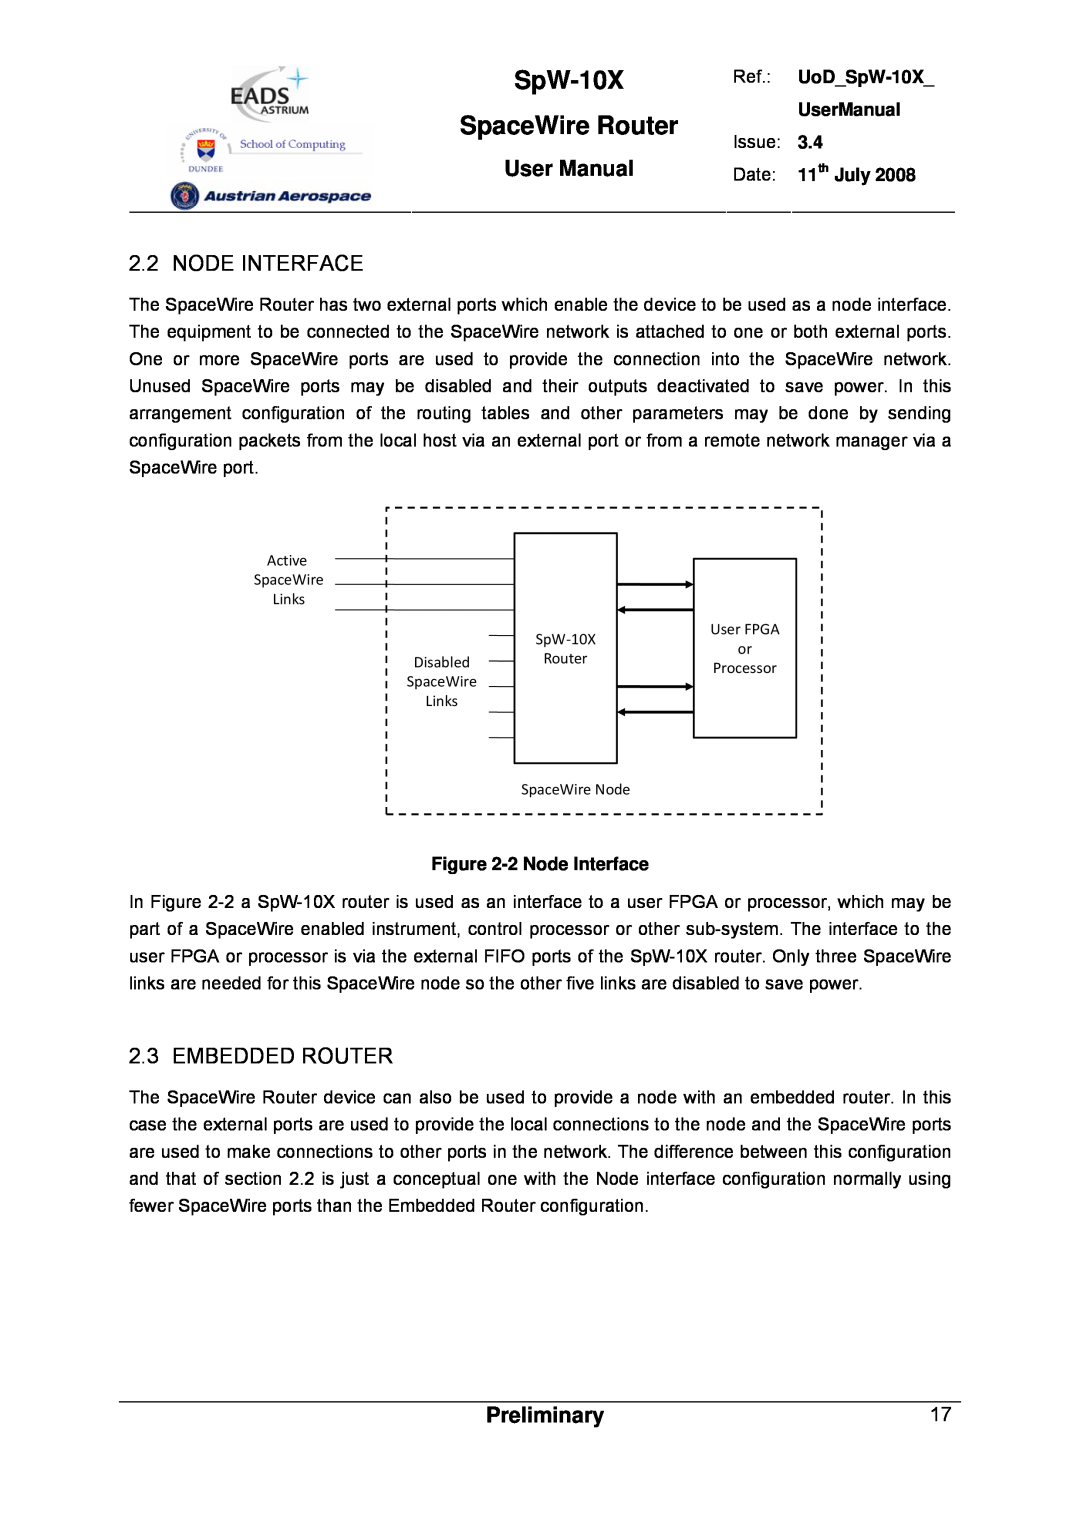 Atmel SpW-10X user manual Node Interface, Embedded Router, SpaceWire Router, User Manual, Preliminary 